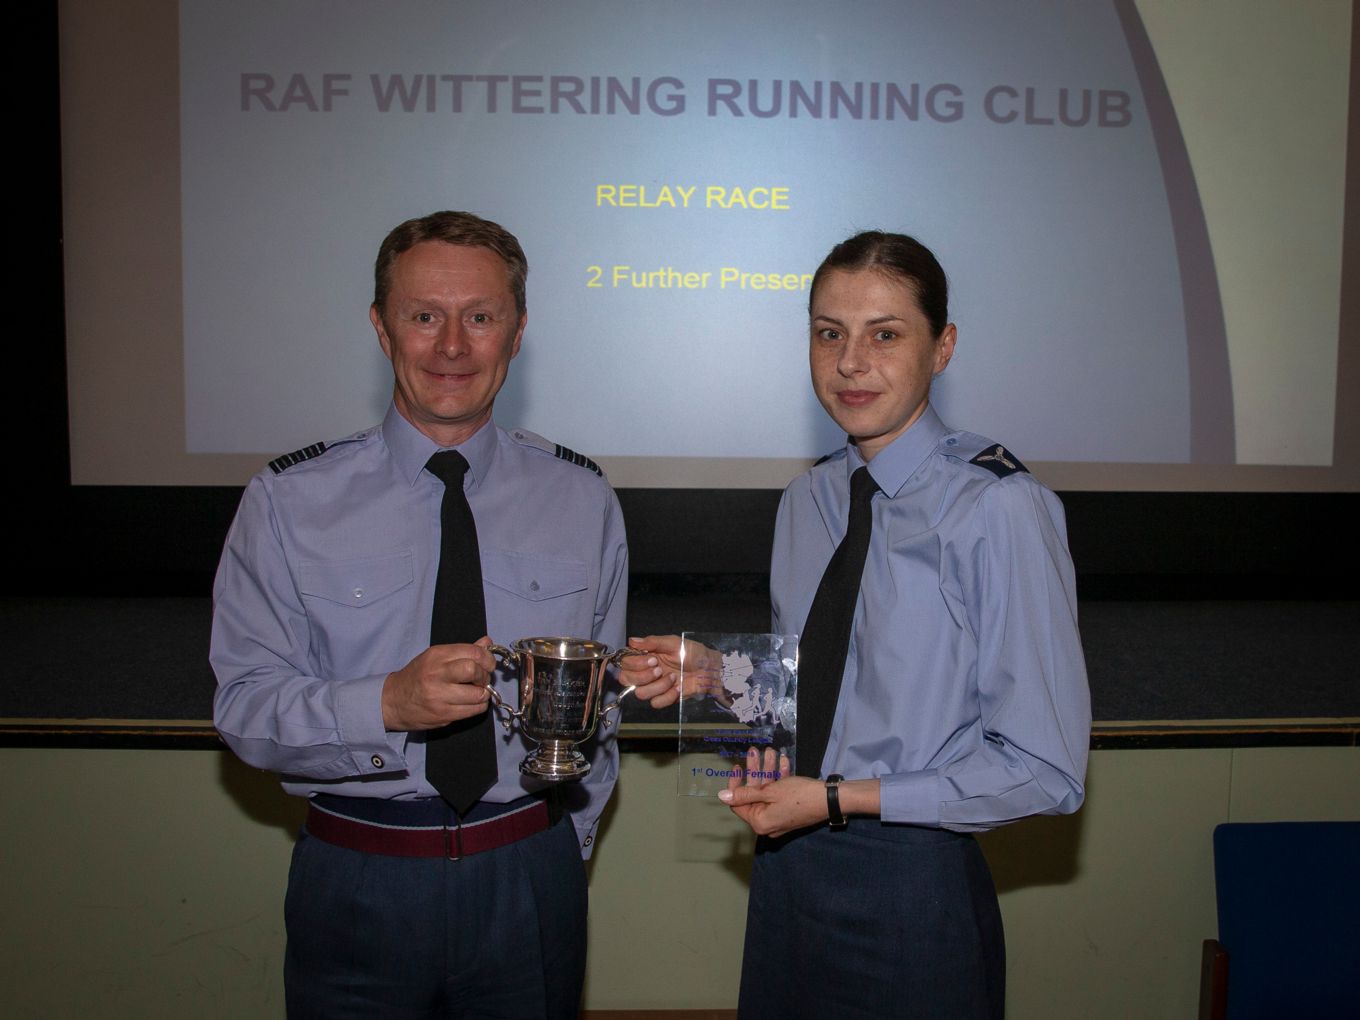 SAC Finlay receives her award from Group Captain Keeling